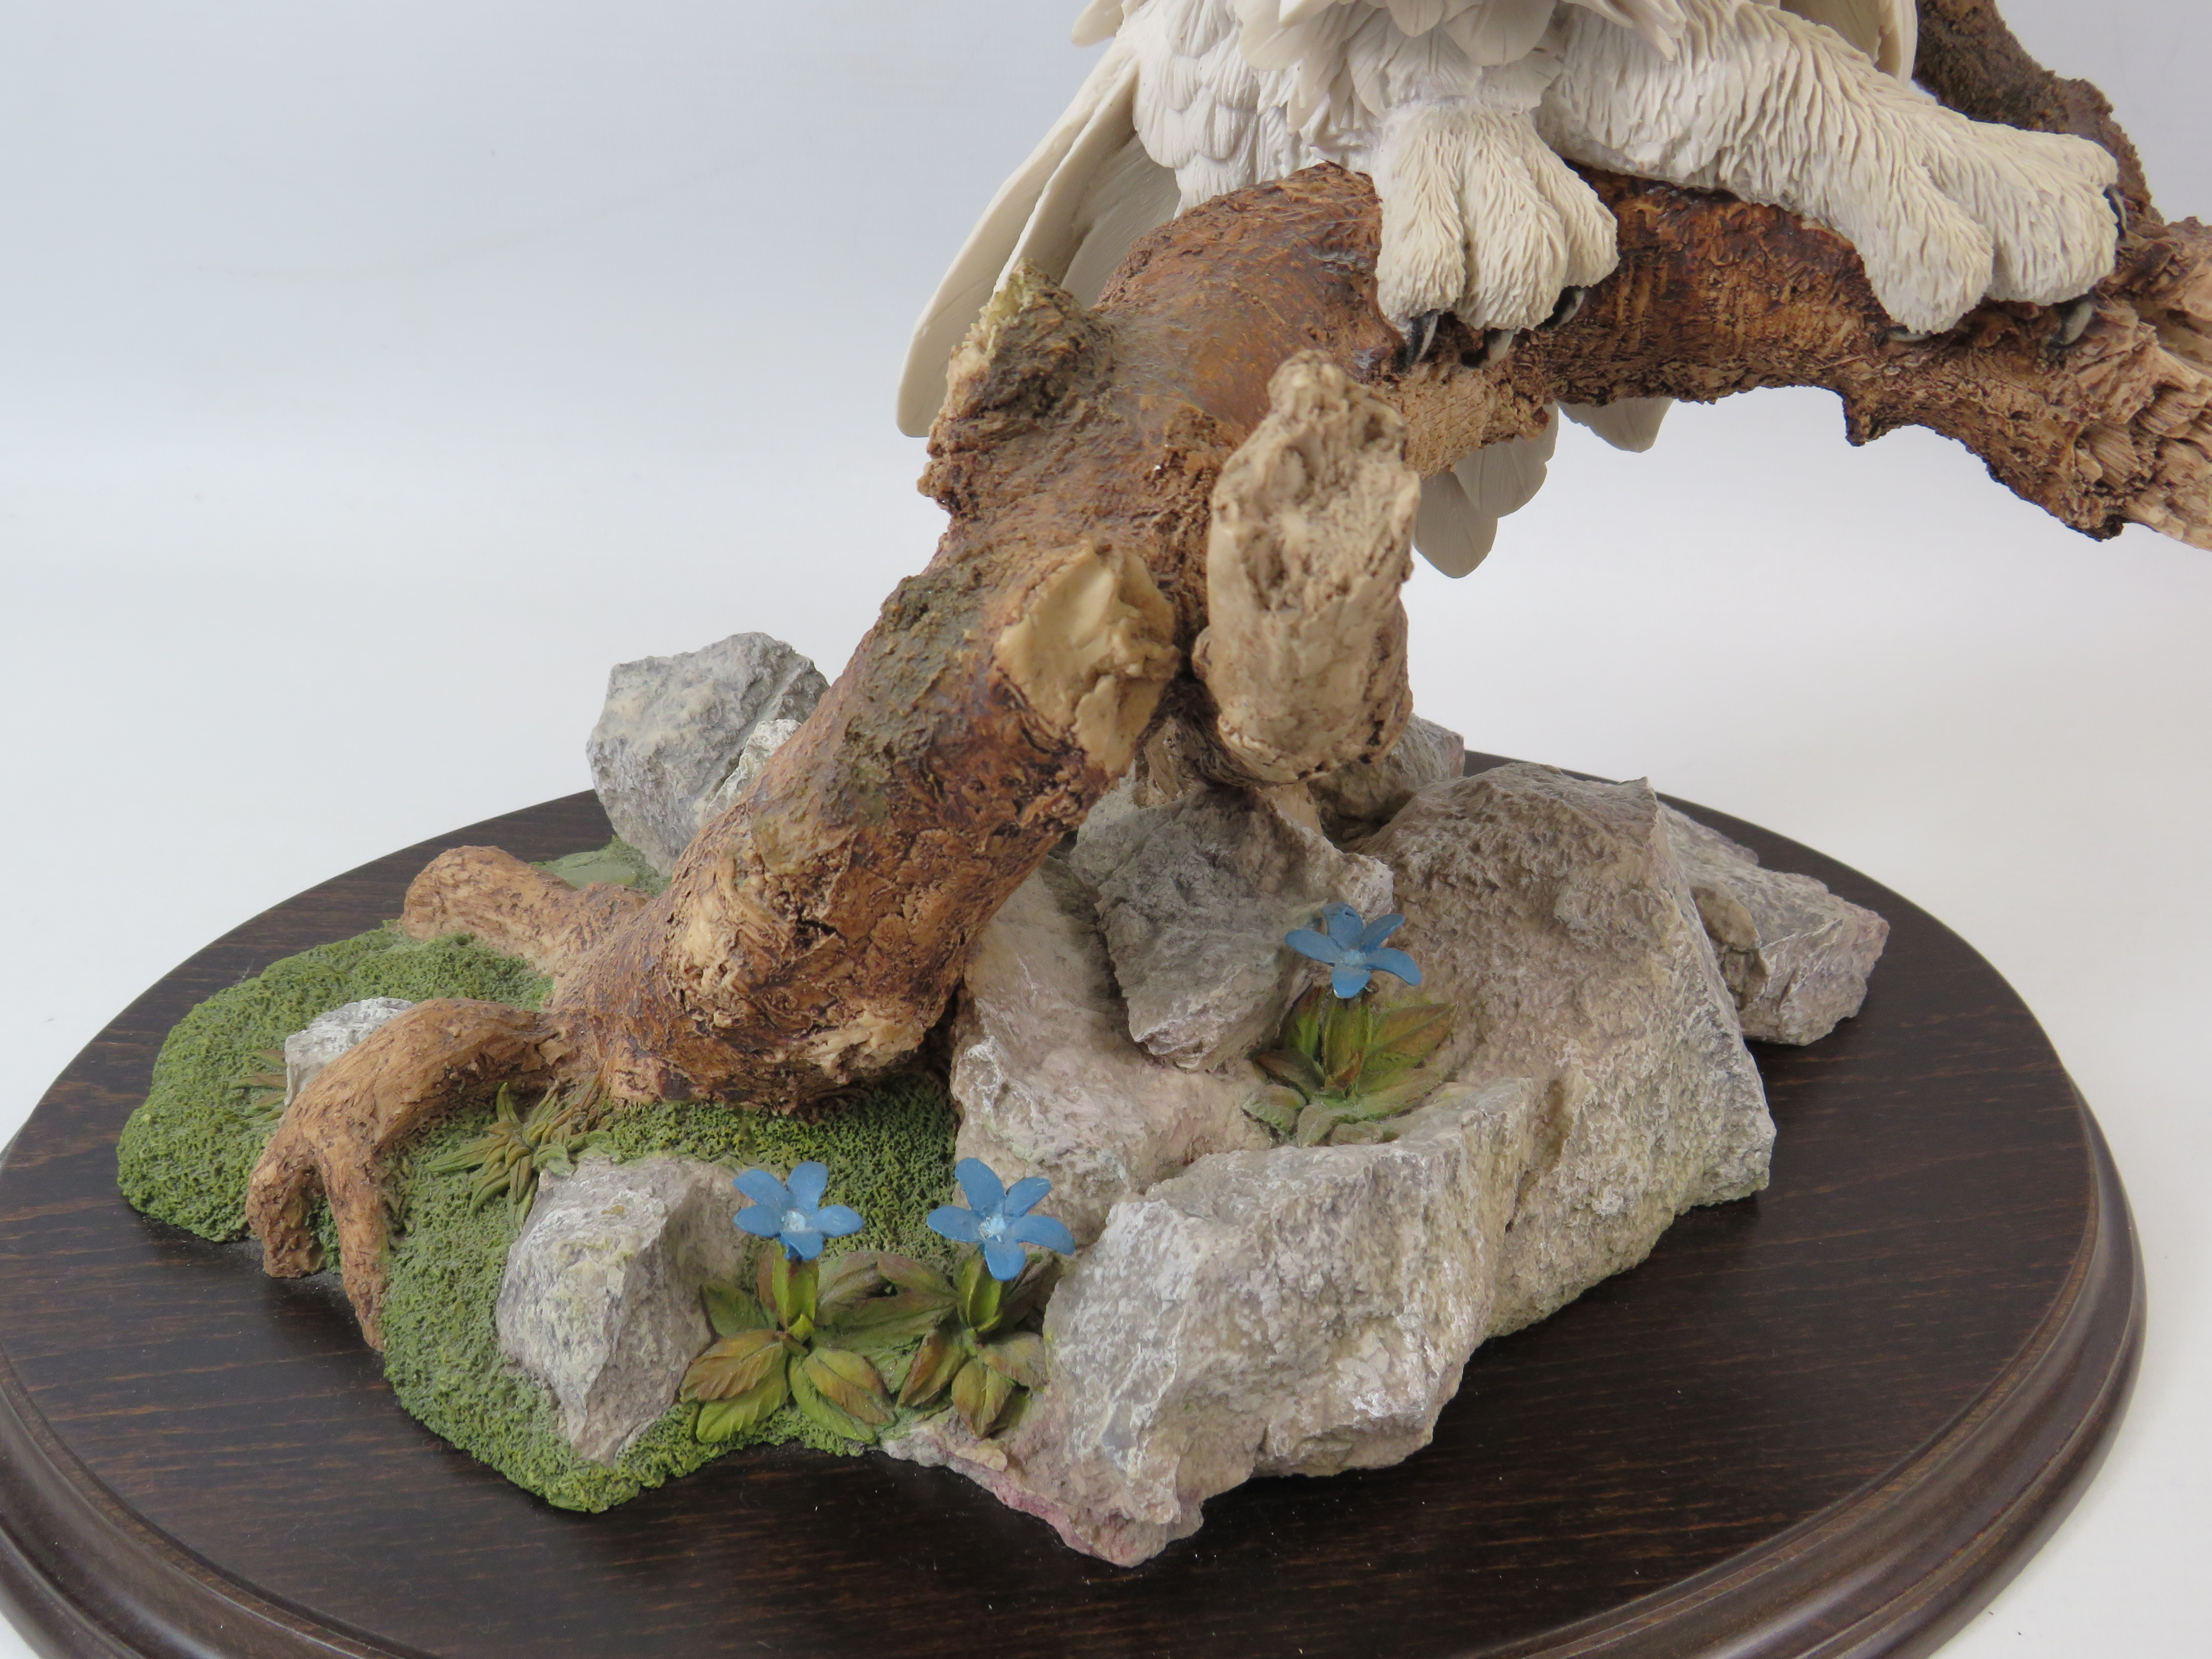 Large Country Artist limited edition sculpture of an Owl "White Splender" No 209 of 350 with cert no - Image 5 of 5